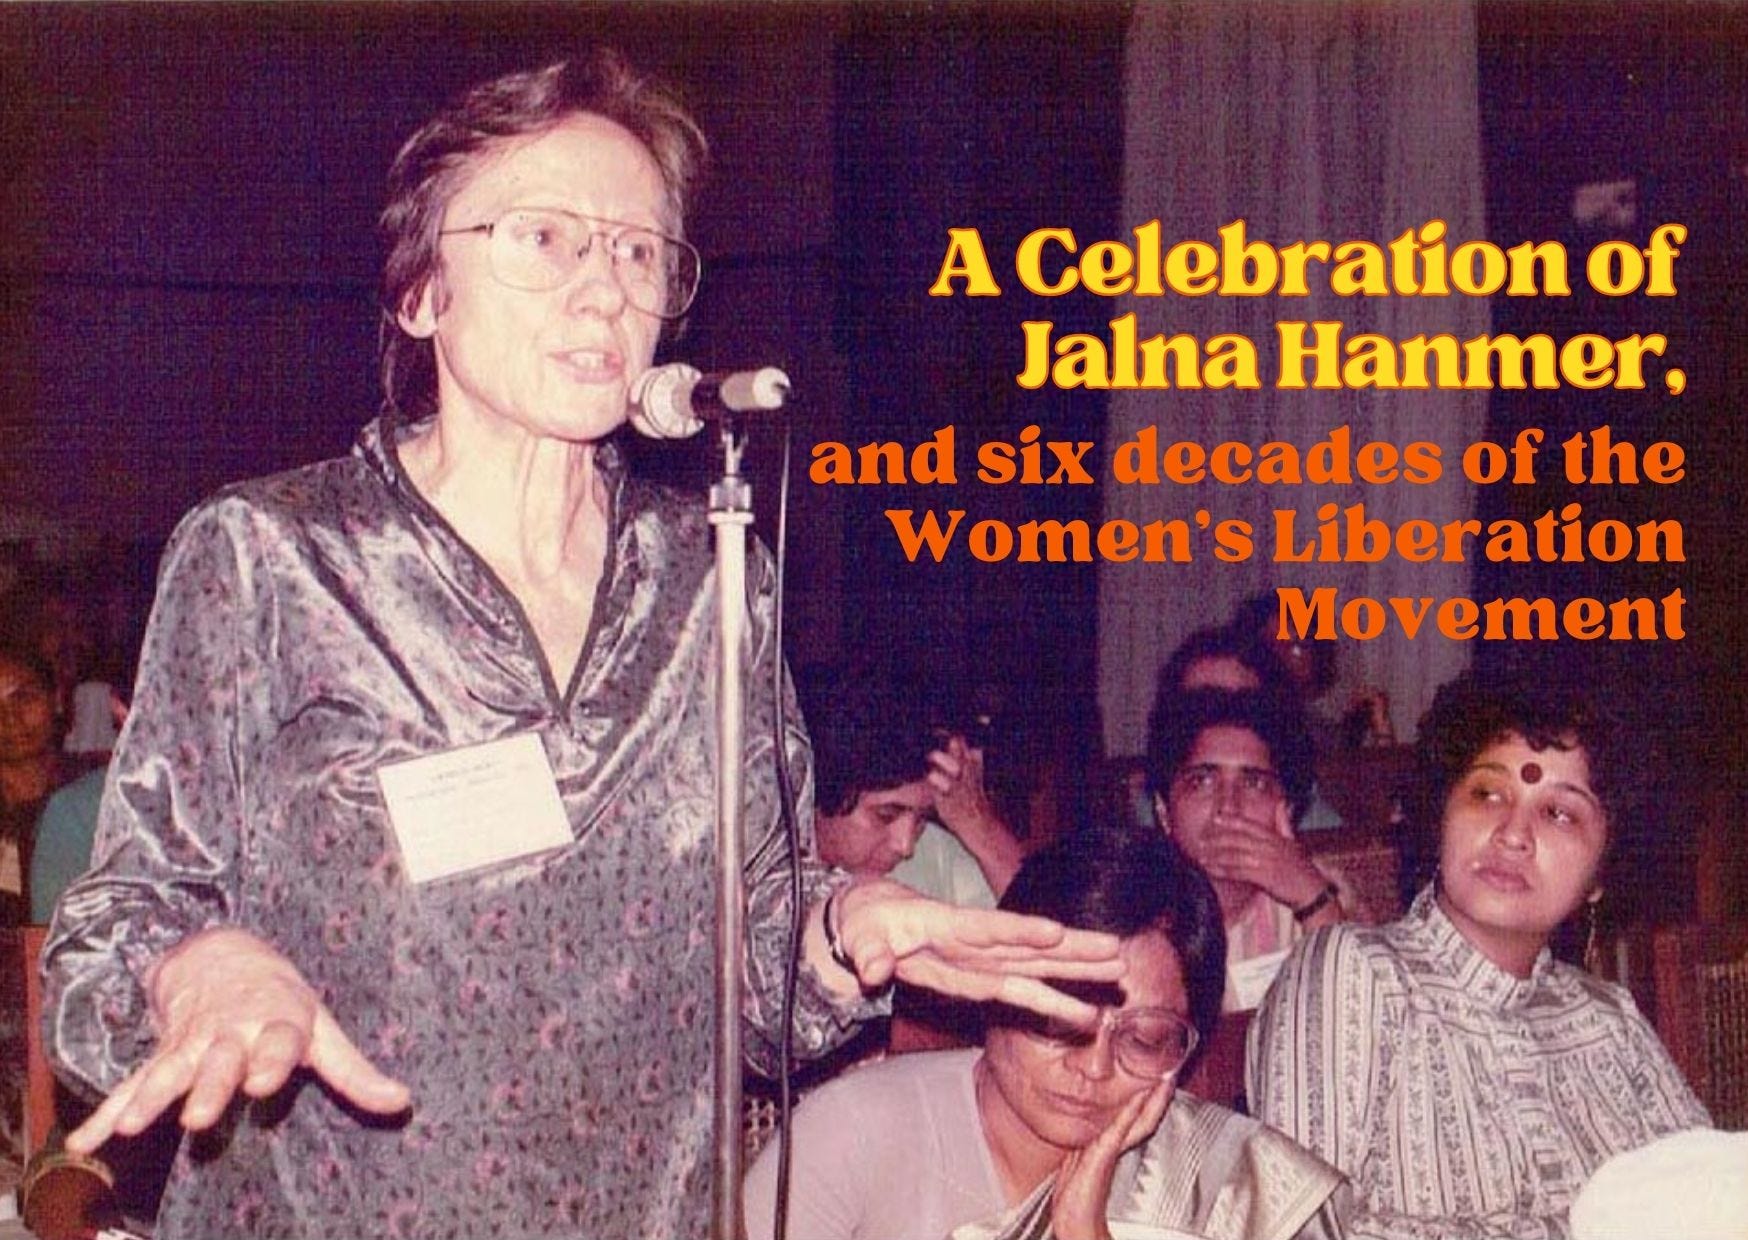 Celebrating the life and work of Jalna Hanmer